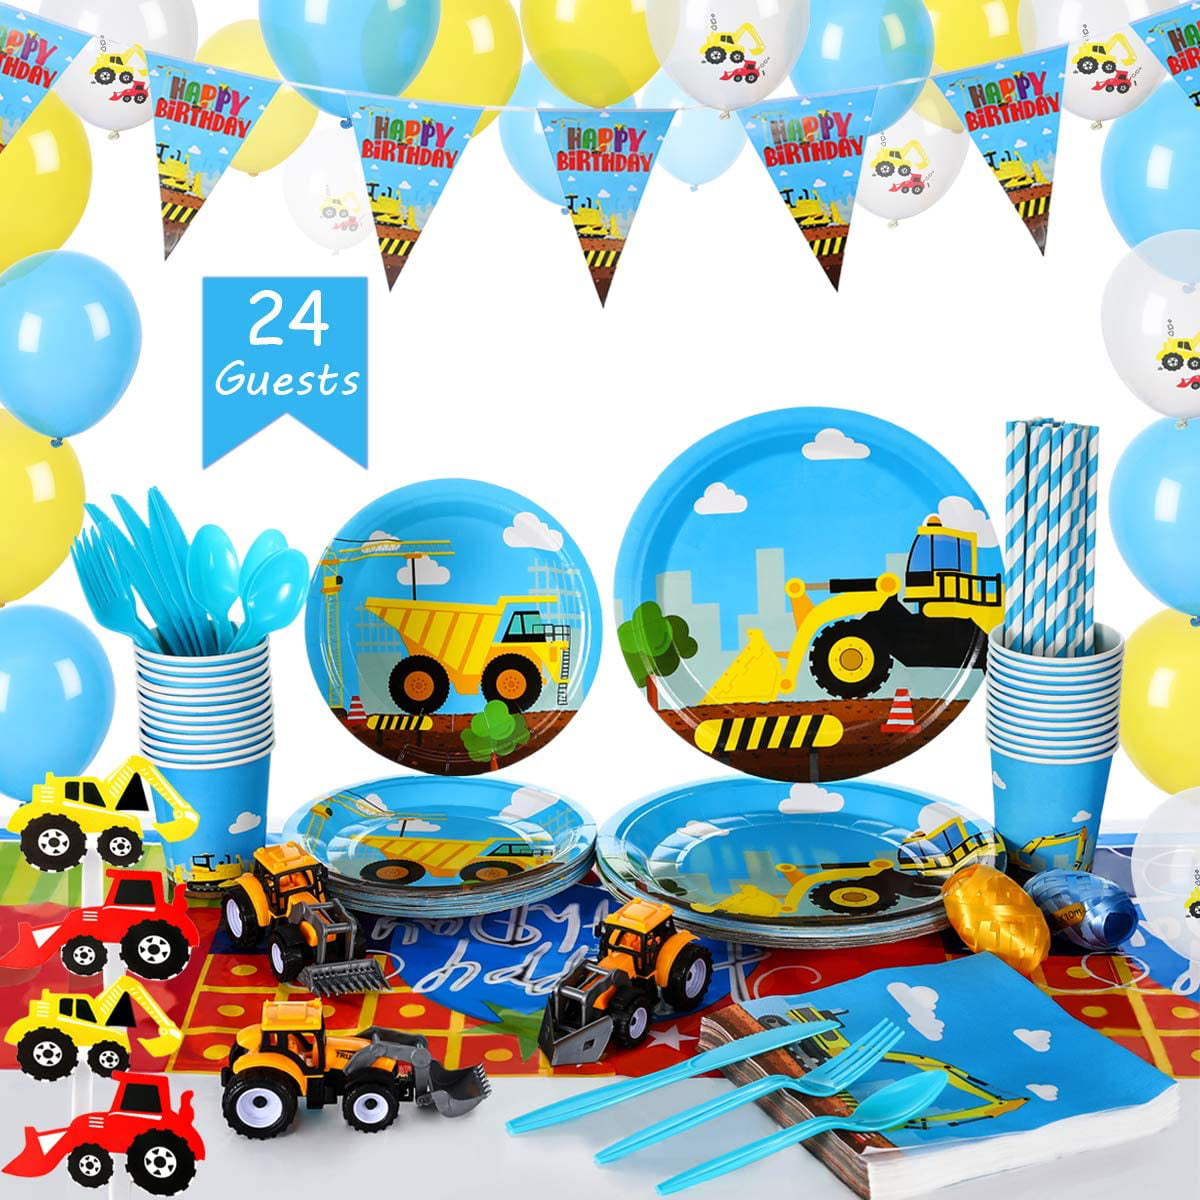 Spiderman Birthday Party Supplies Superhero Party Decorations for Boys and Men Includes 86 Premium Pieces With Extra Cutlery and Spiderman Masks for Kids 